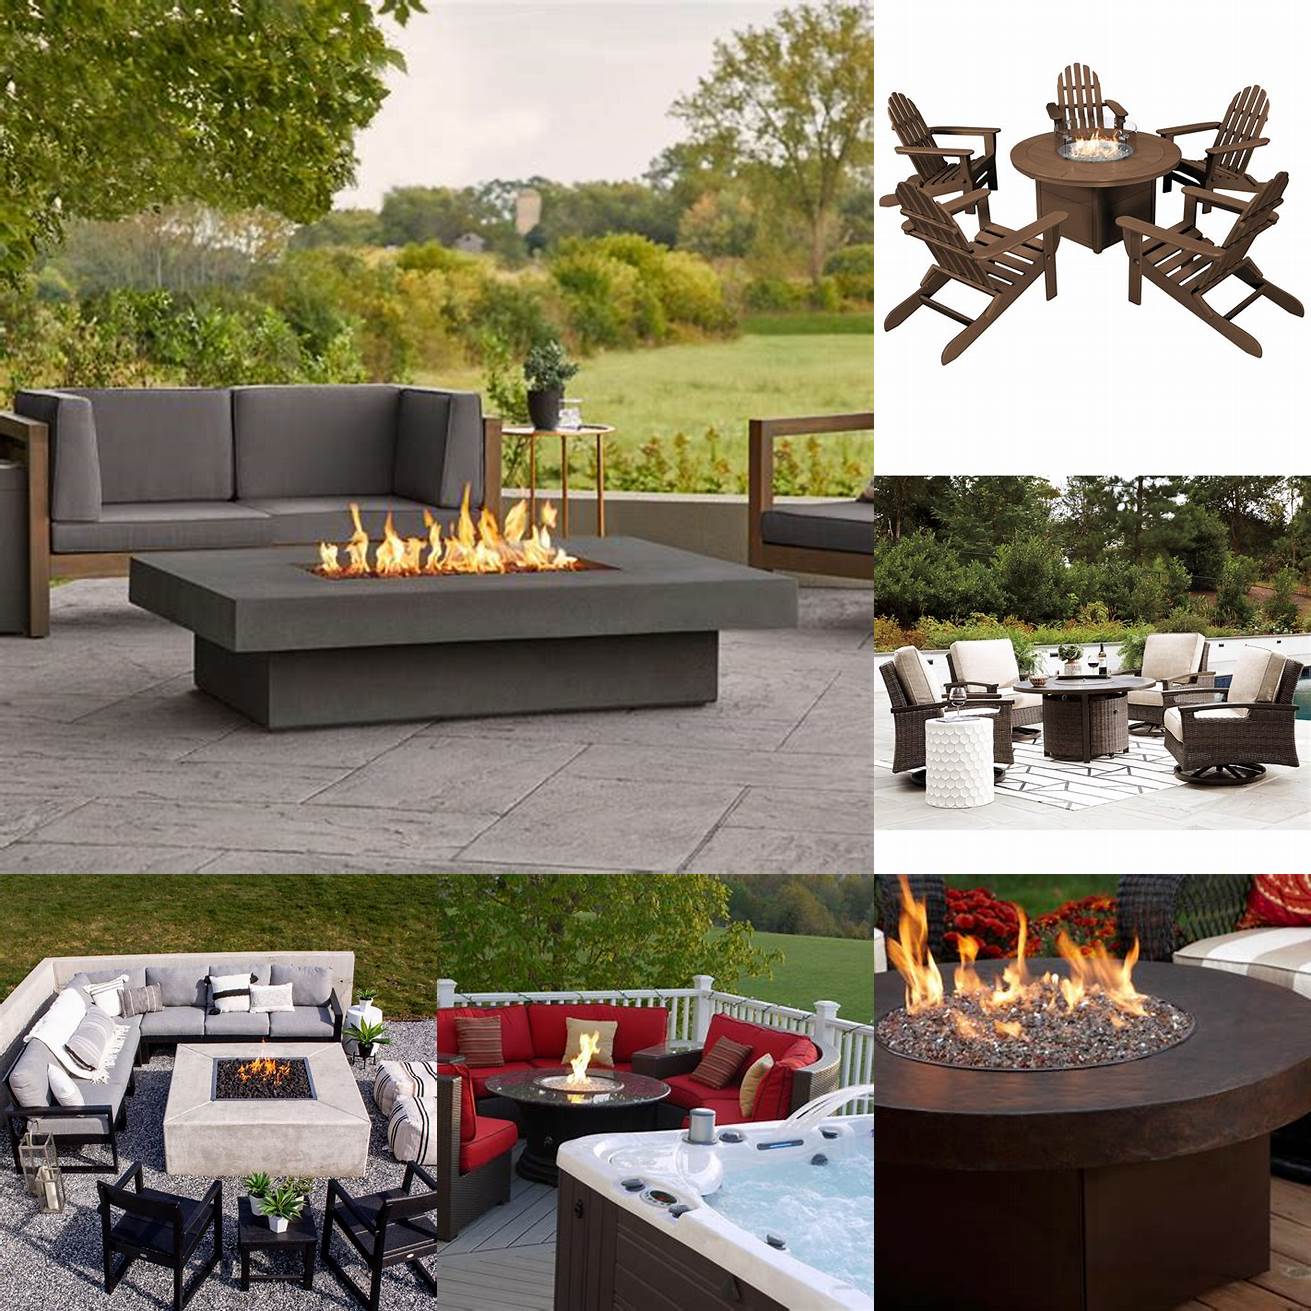 Teak Table With a Fire Pit